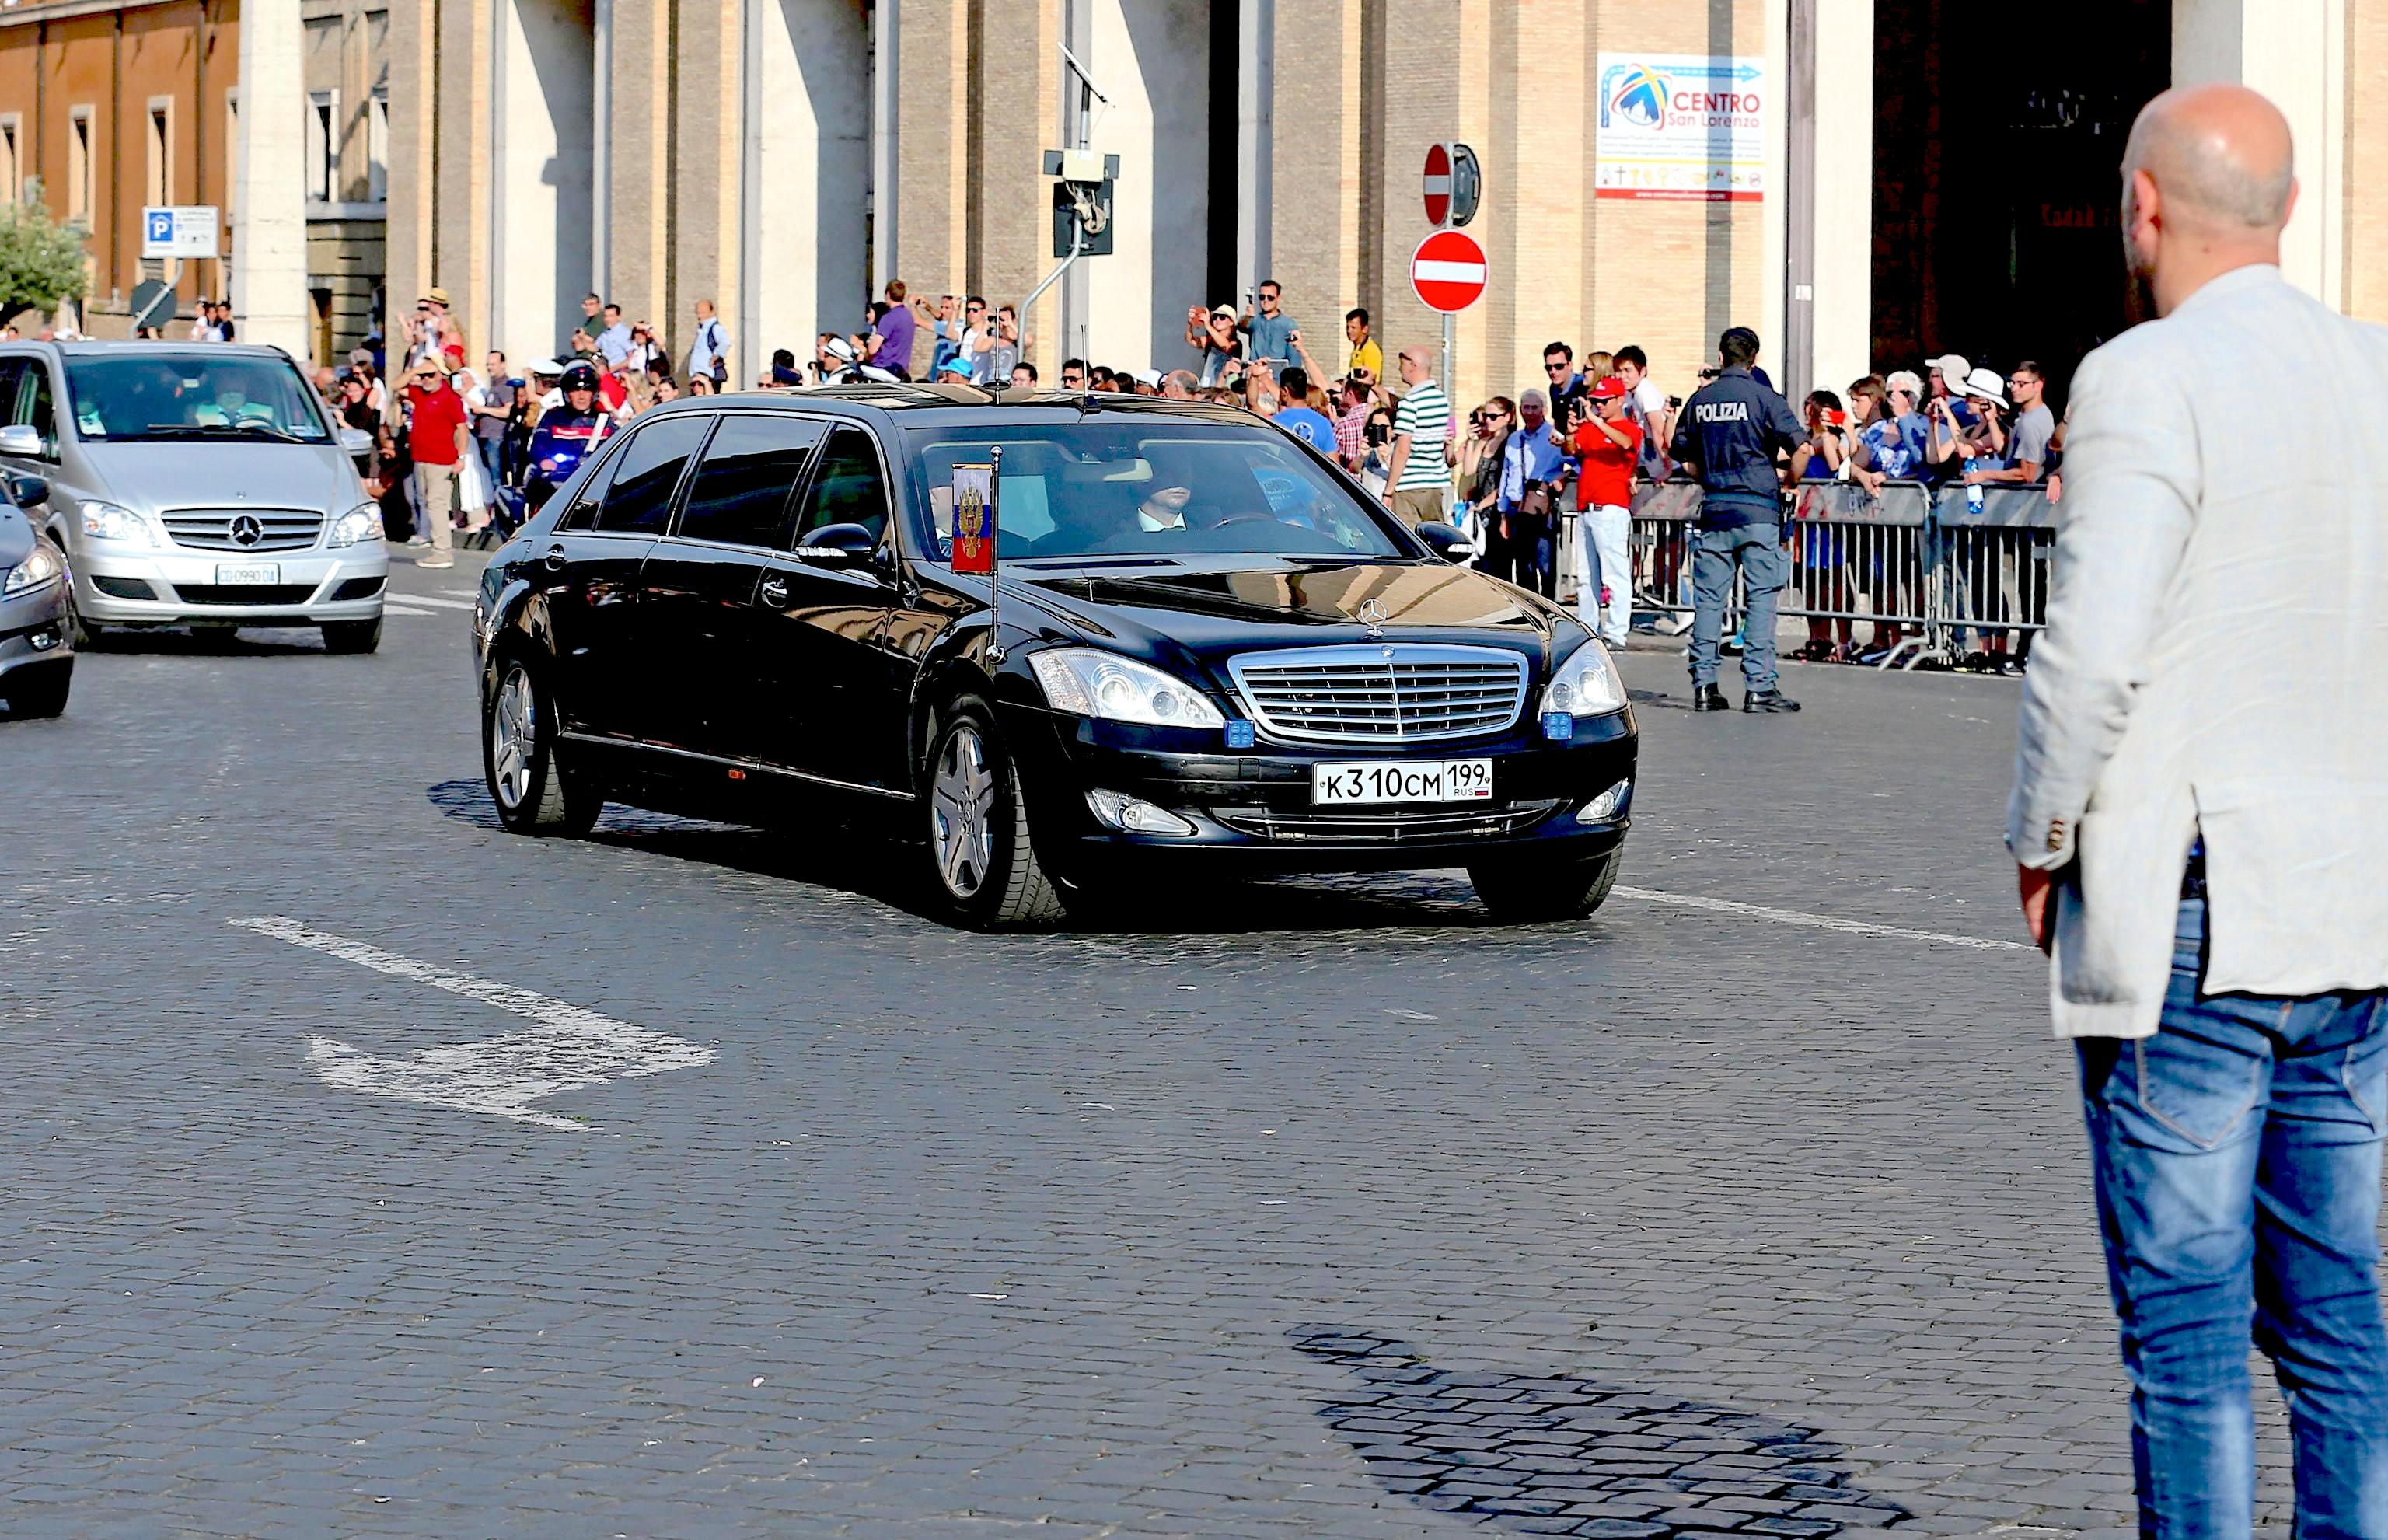 Russian President Vladimir Putin arrives at the Vatican for a private audience with Pope Francis